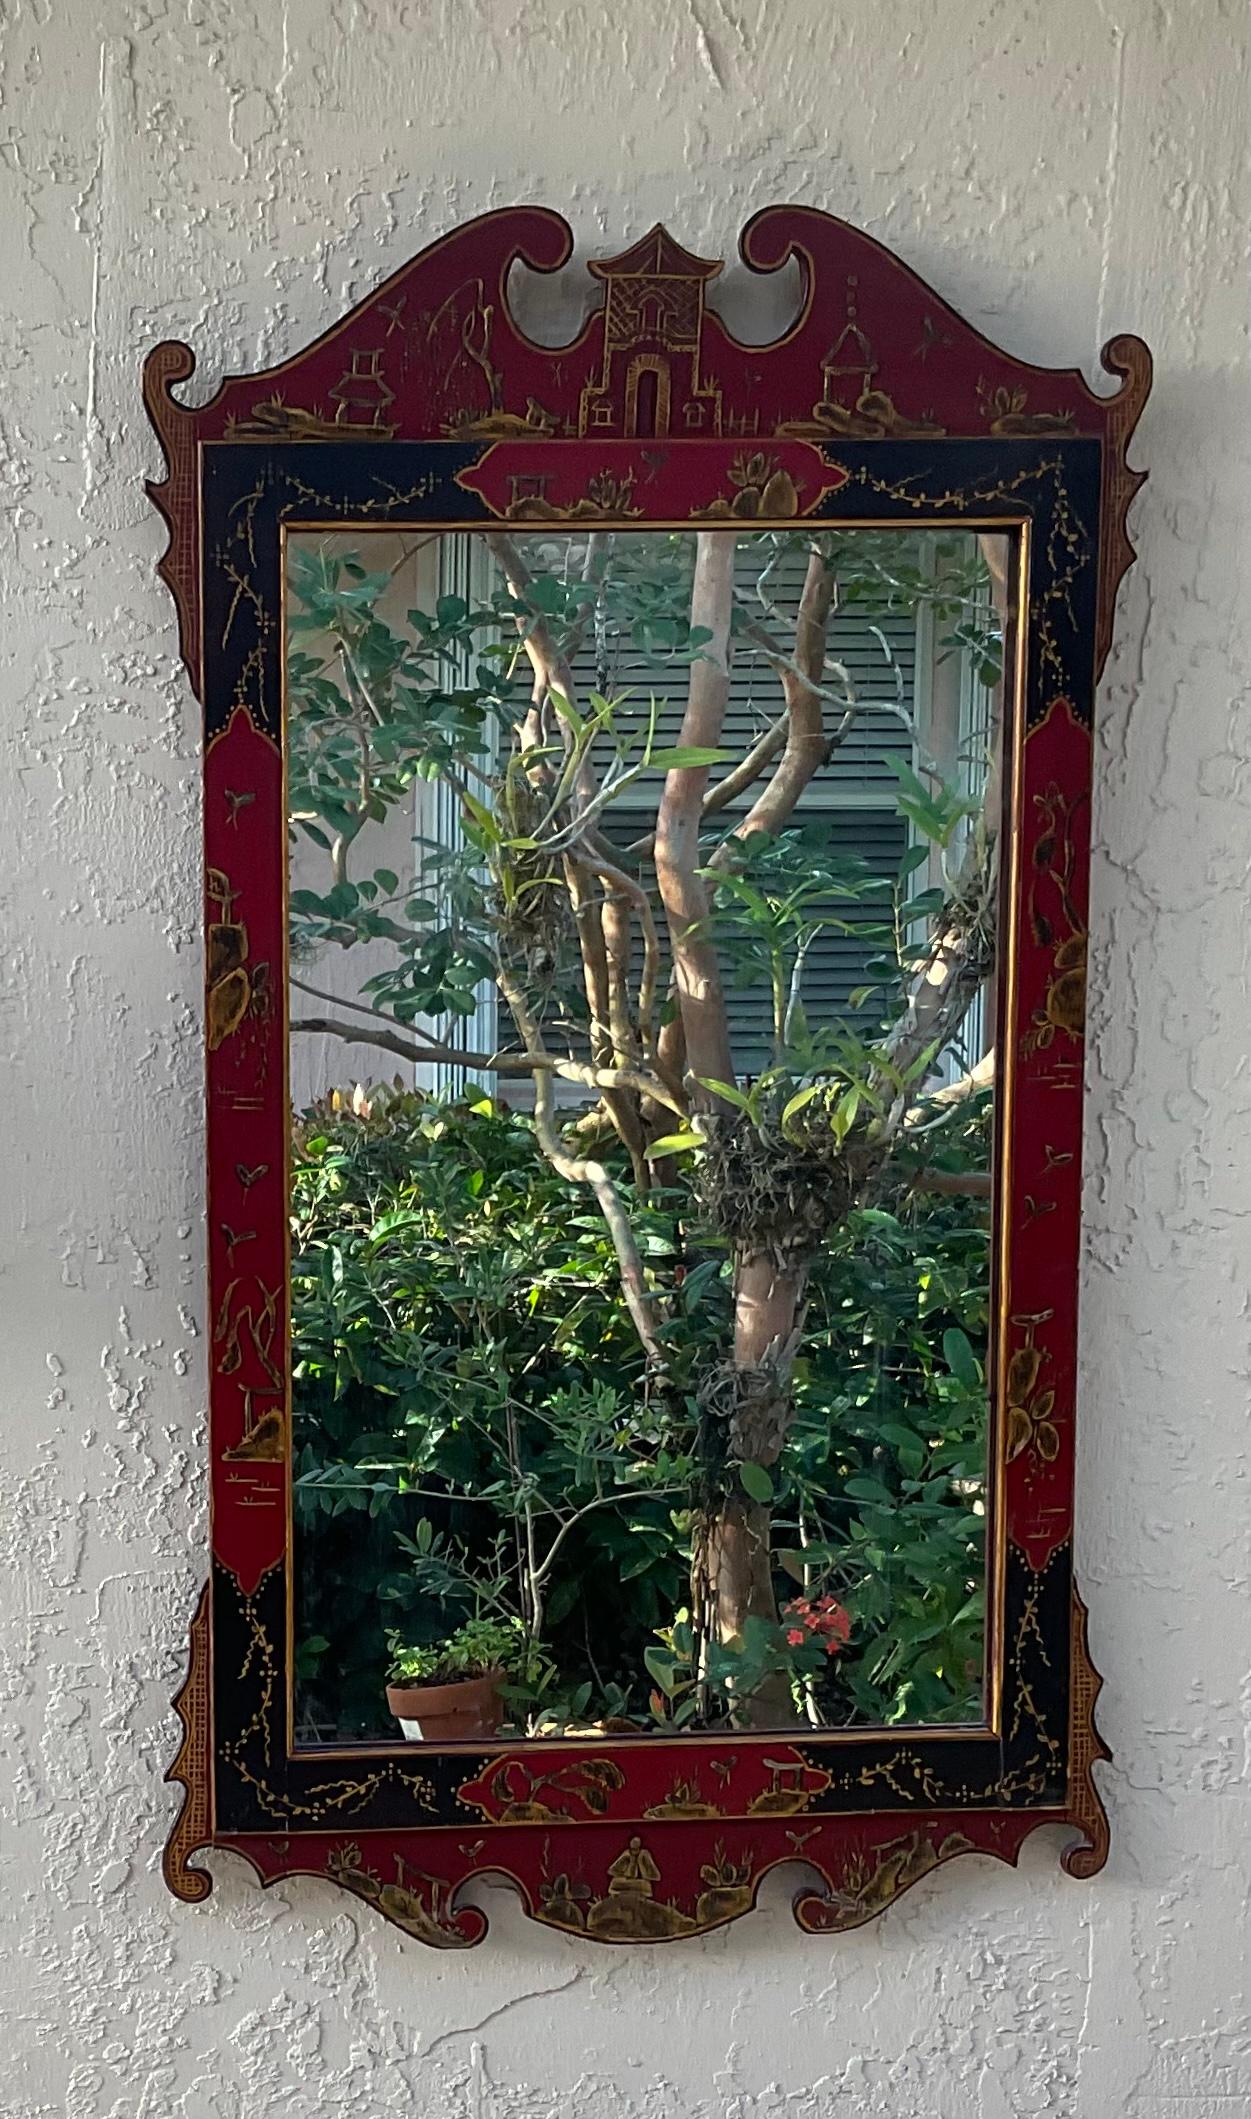 Beautiful Chinese mirror in carved wood ,giltwood with lacquered finish garden motif decorations. In great vintage condition with age-appropria.
Original glass is in fair condition due to use and age , has some fading on various spot. See photos ,